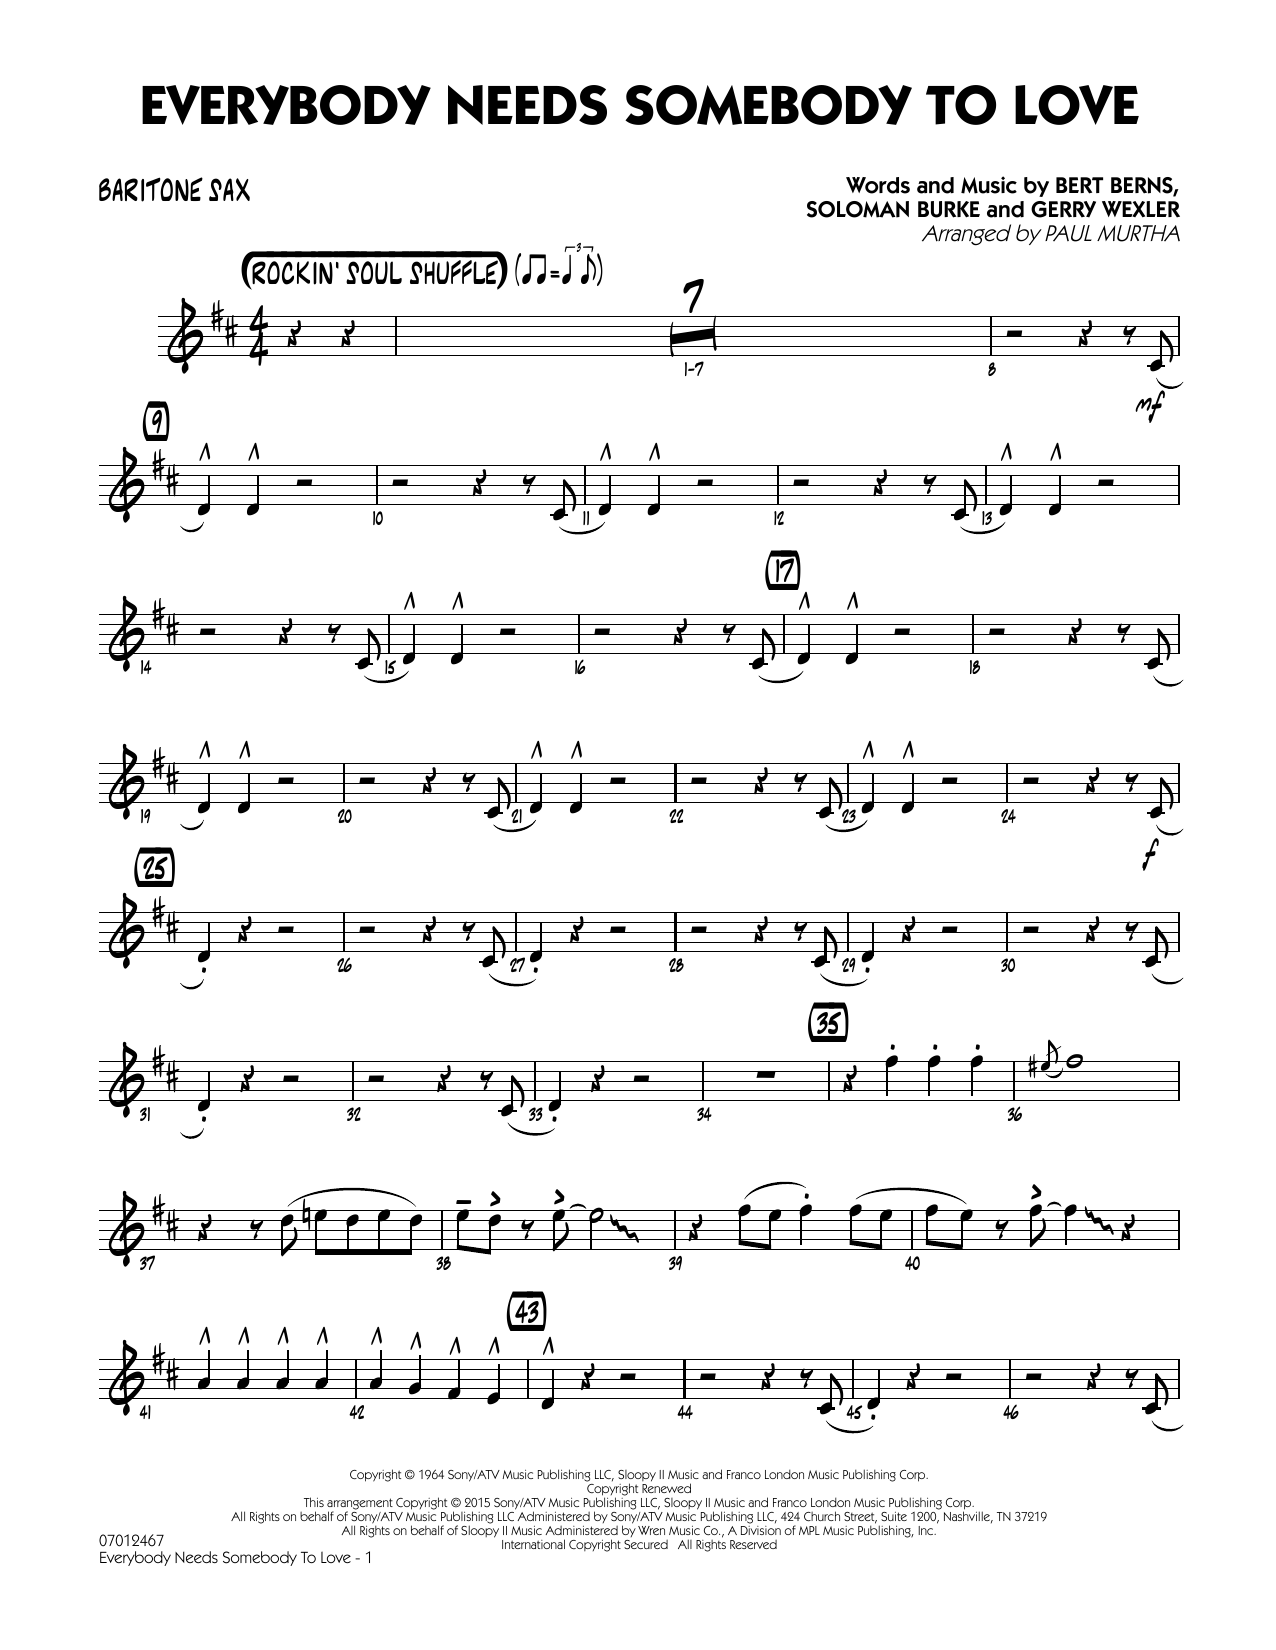 Paul Murtha Everybody Needs Somebody to Love - Baritone Sax sheet music notes and chords. Download Printable PDF.